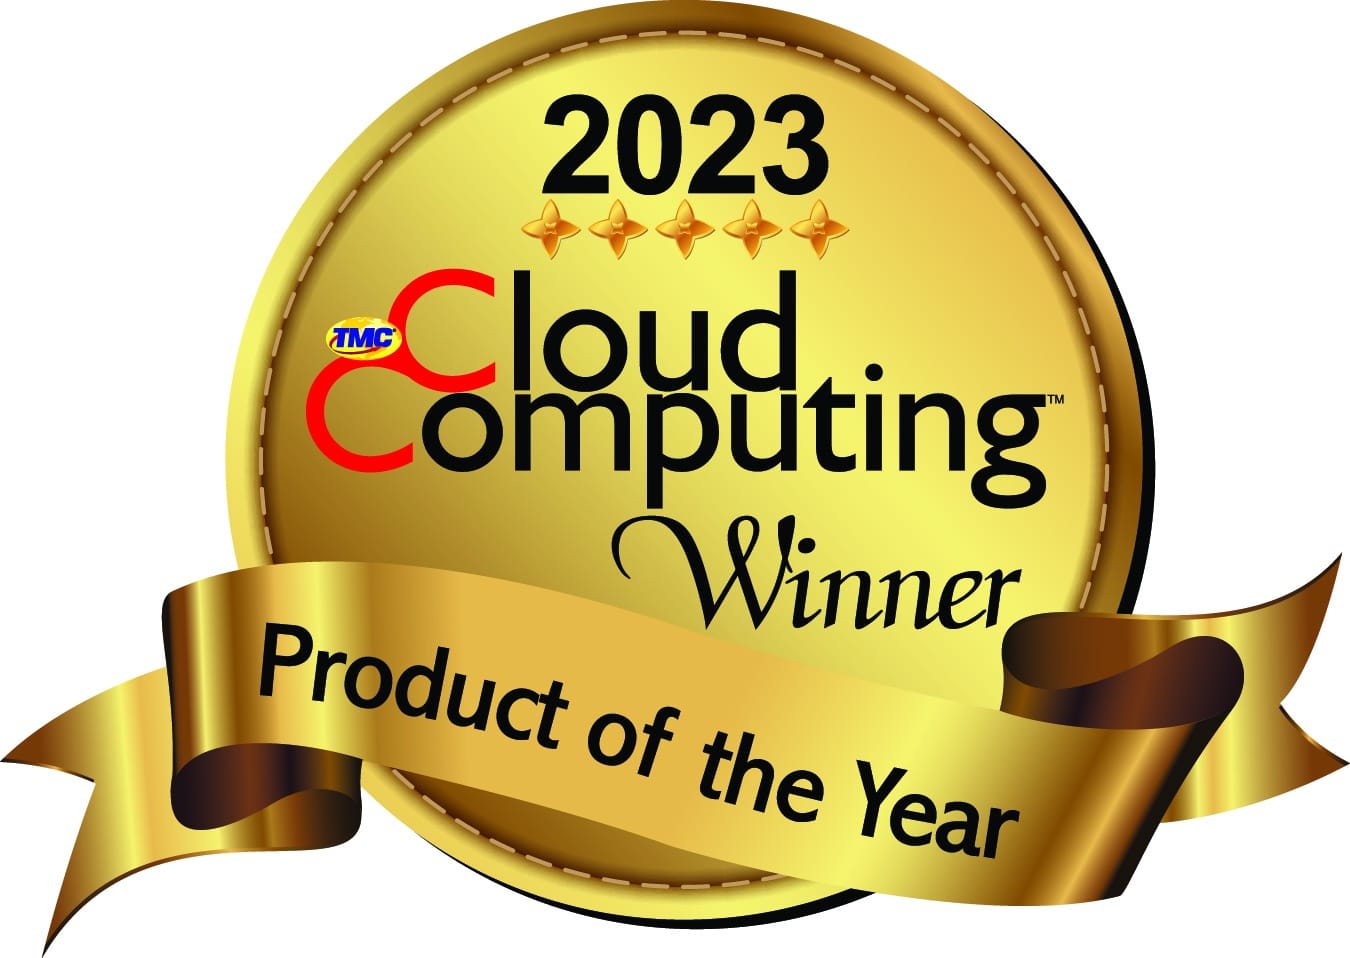 Massive Networks Honored With Cloud Computing Product of the Year Award